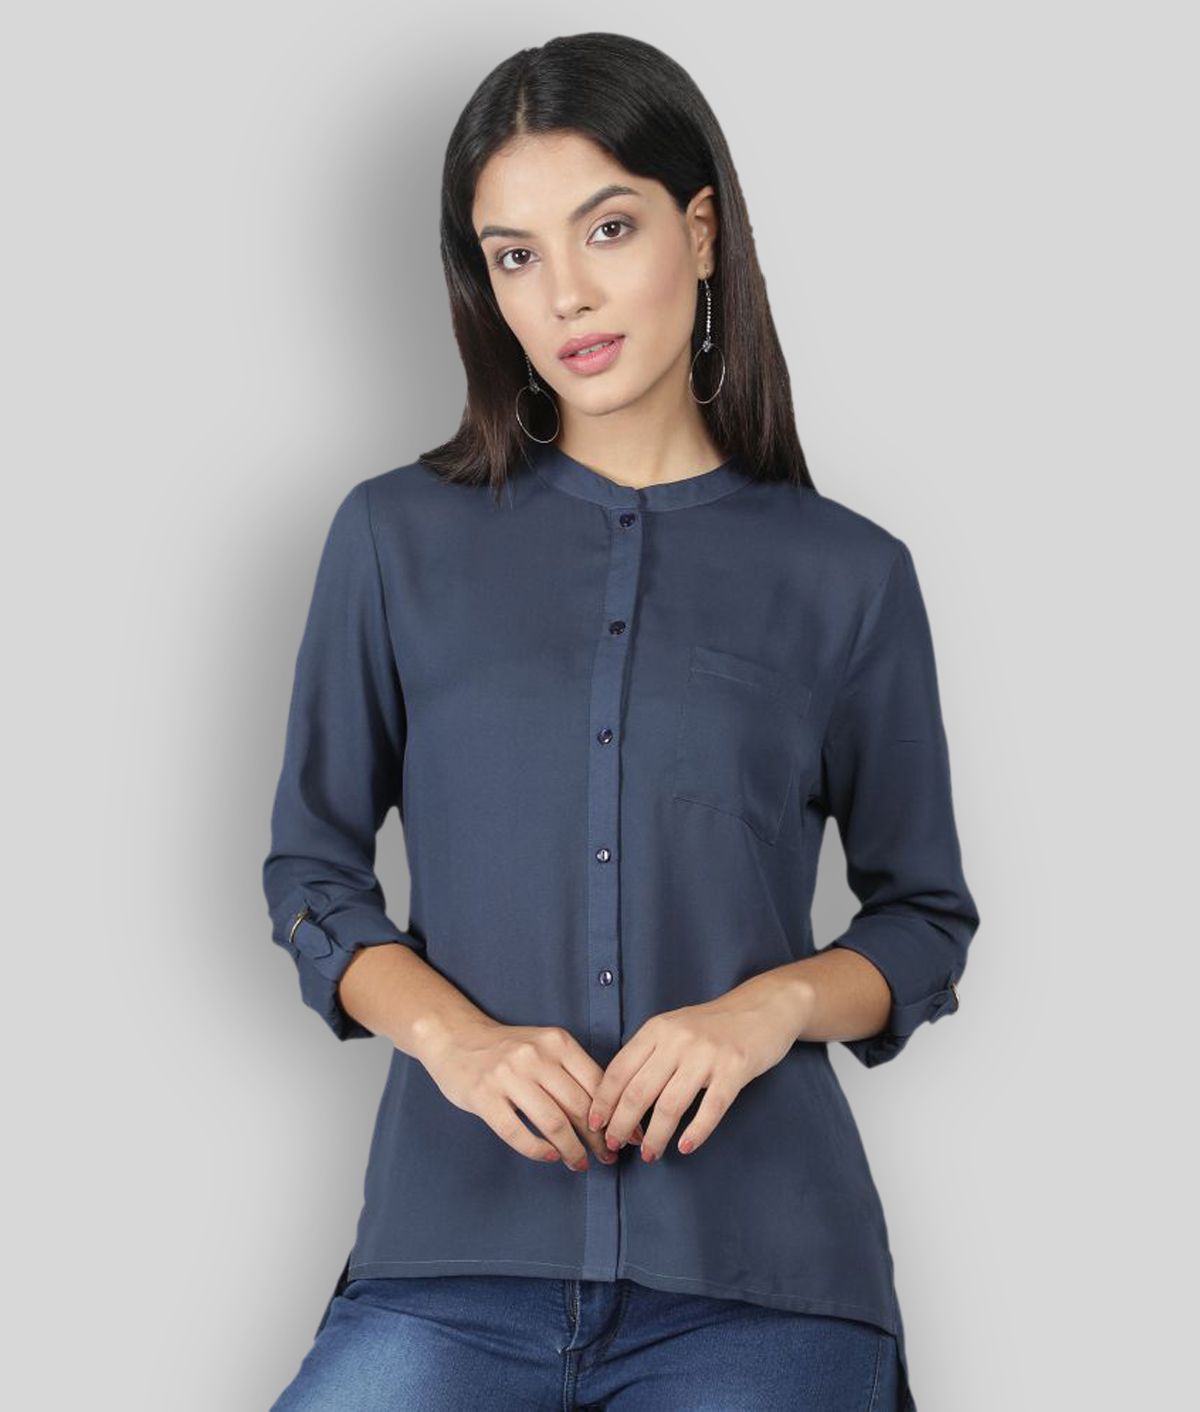     			NUEVOSDAMAS - Blue Georgette Women's Shirt Style Top ( Pack of 1 )